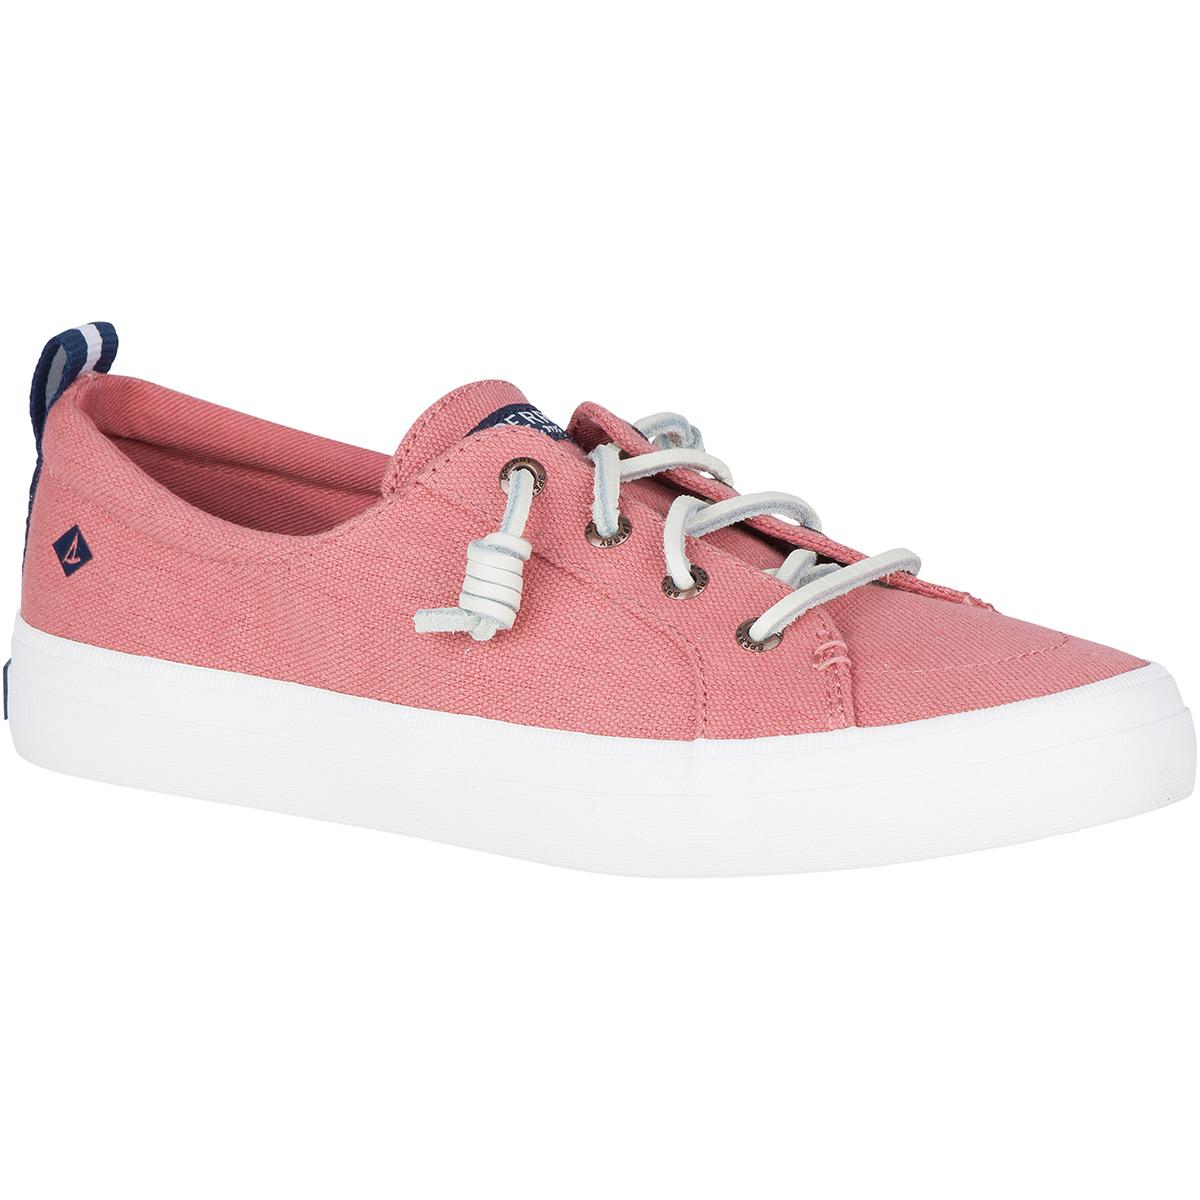 Sperry Women's Crest Vibe Sneakers - Red, 7